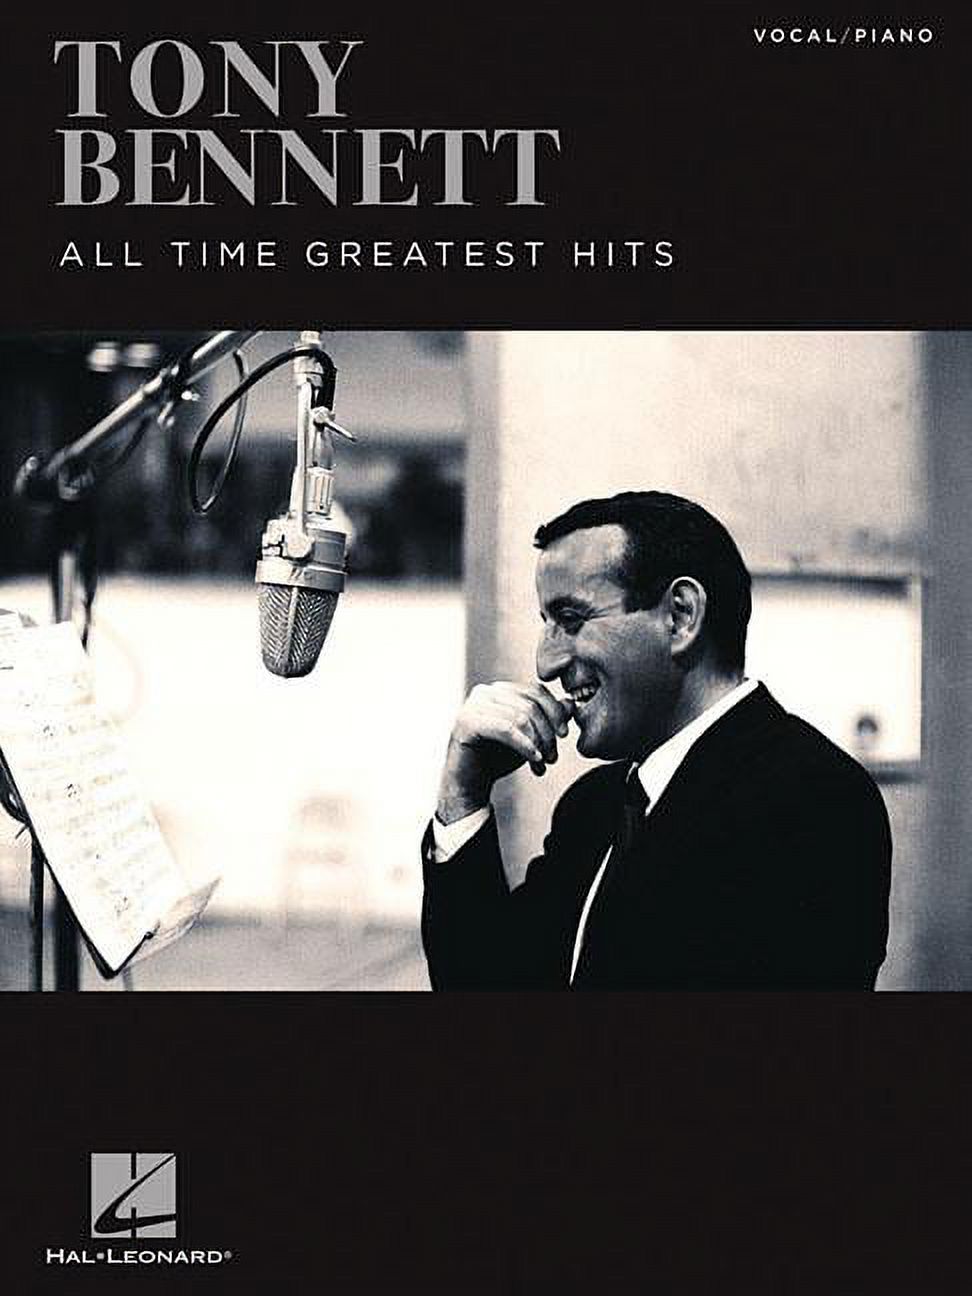 Tony Bennett - All Time Greatest Hits (Paperback) - image 1 of 1